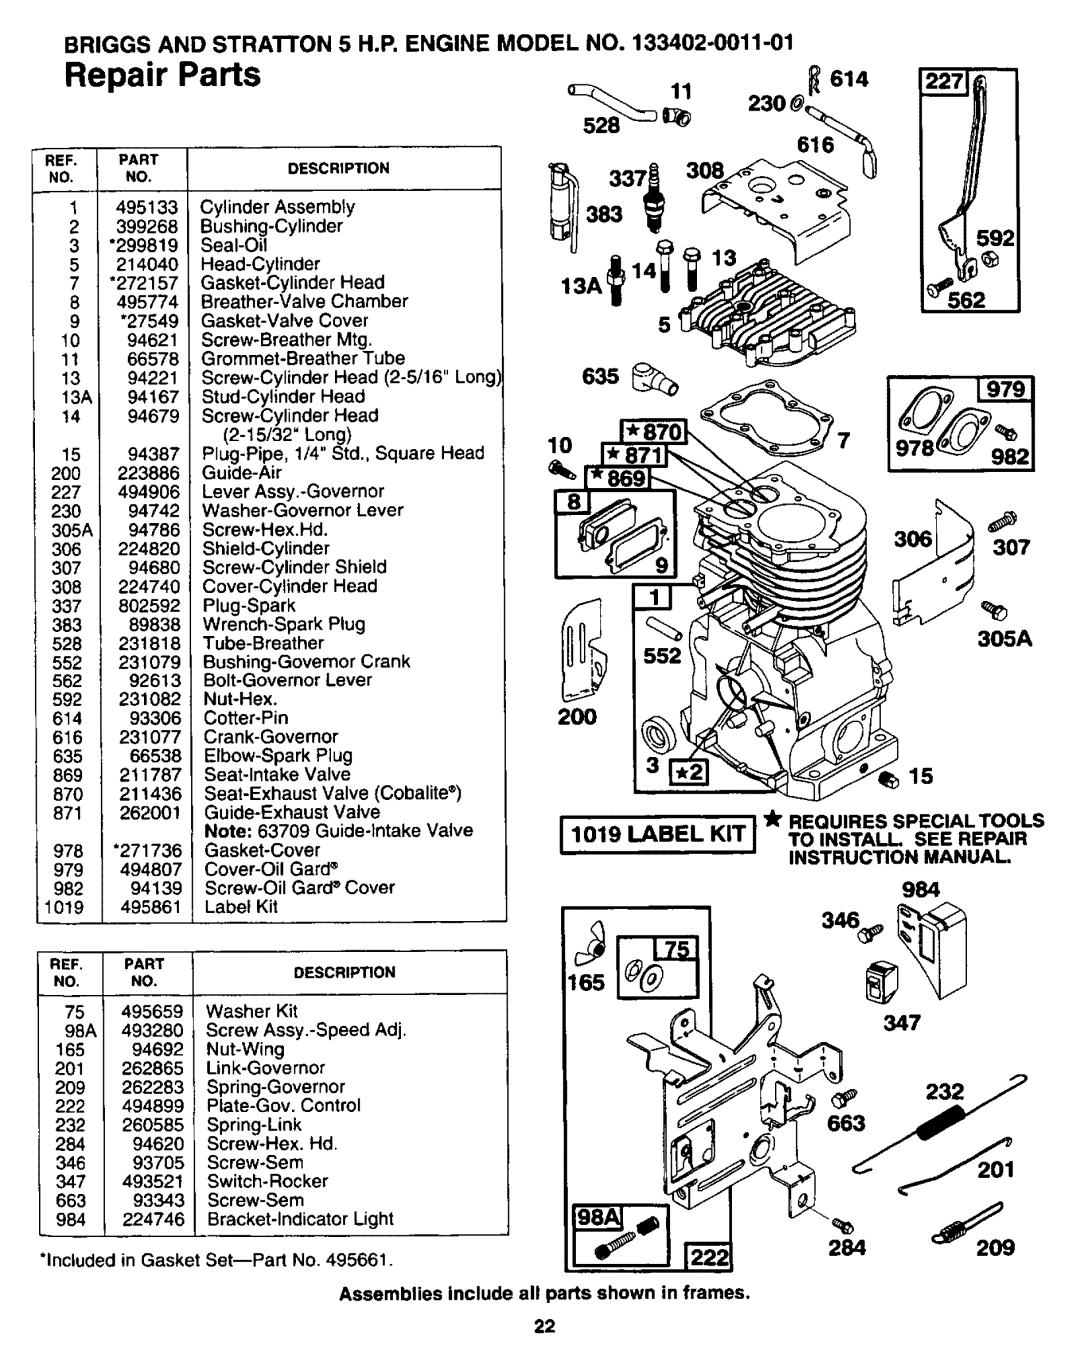 Sears 247.34625 owner manual BRIGGS AND STRATTON 5 H.P. ENGINE MODEL NO. 614, 305A 